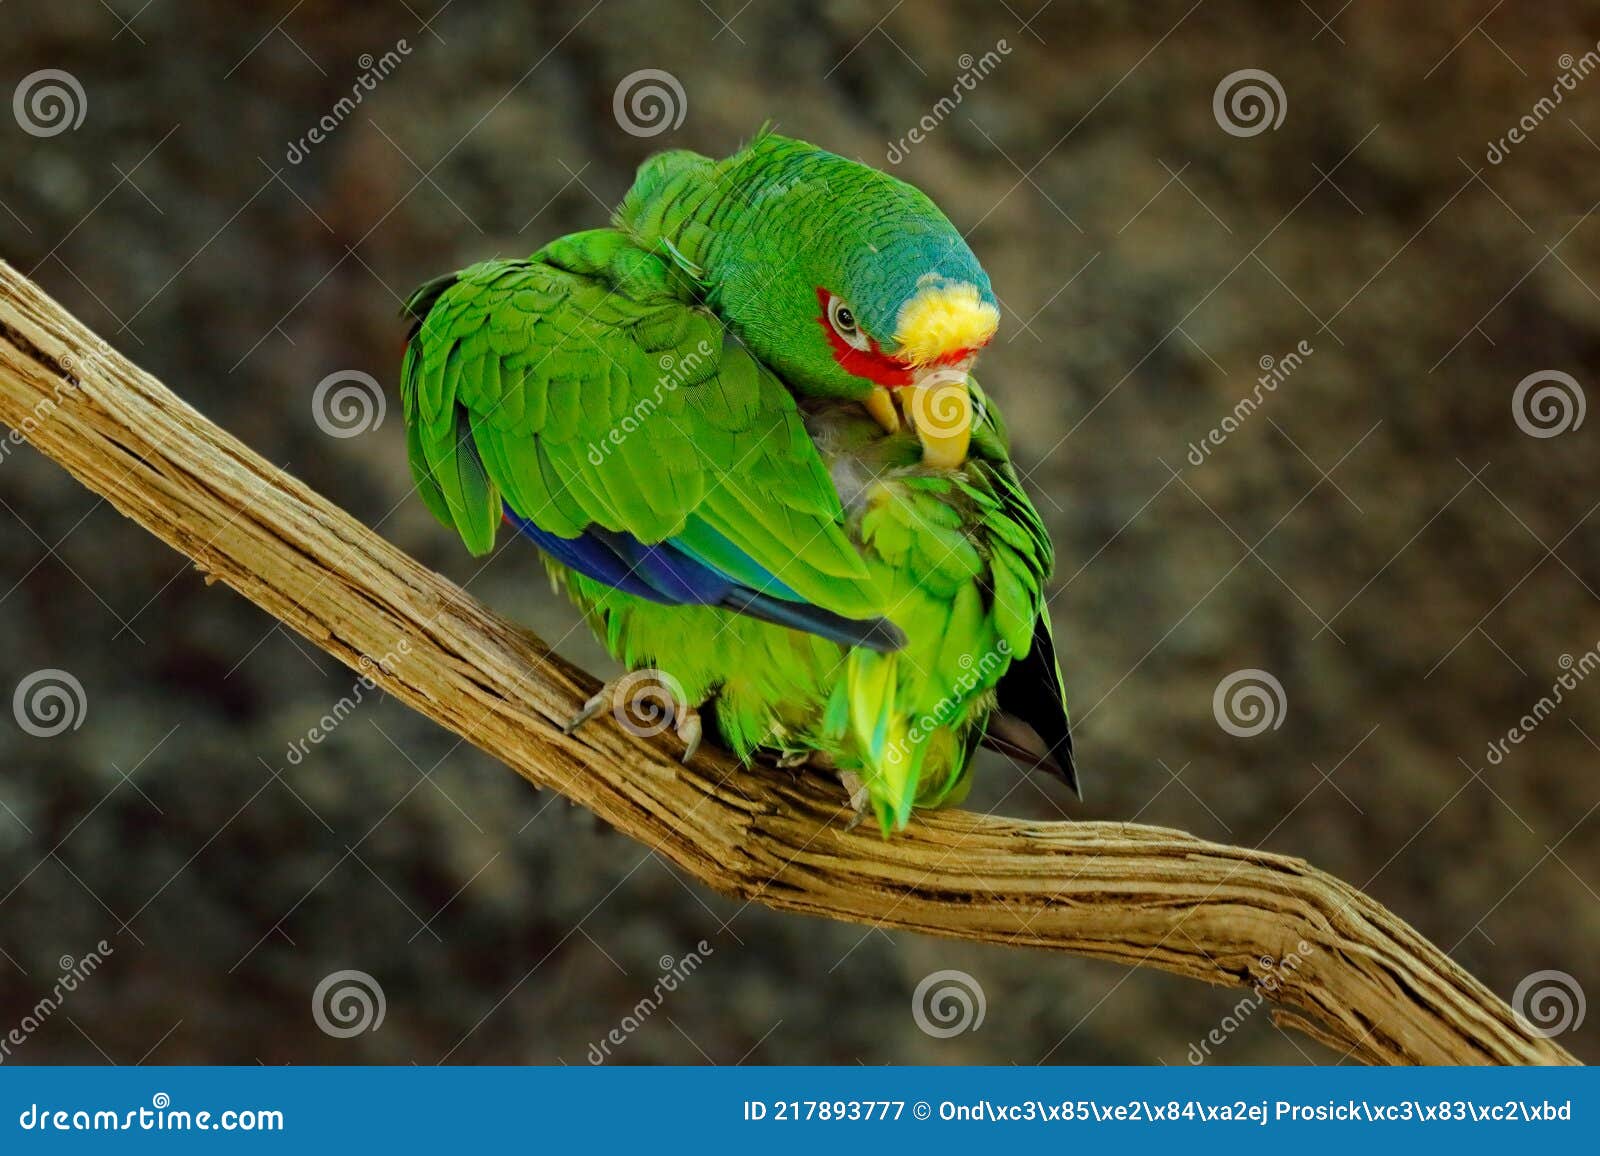 amazona albifrons, green parrot white-fronted amazon, colorful bird from mexico. bird cleaning plumage feather on the tree branch